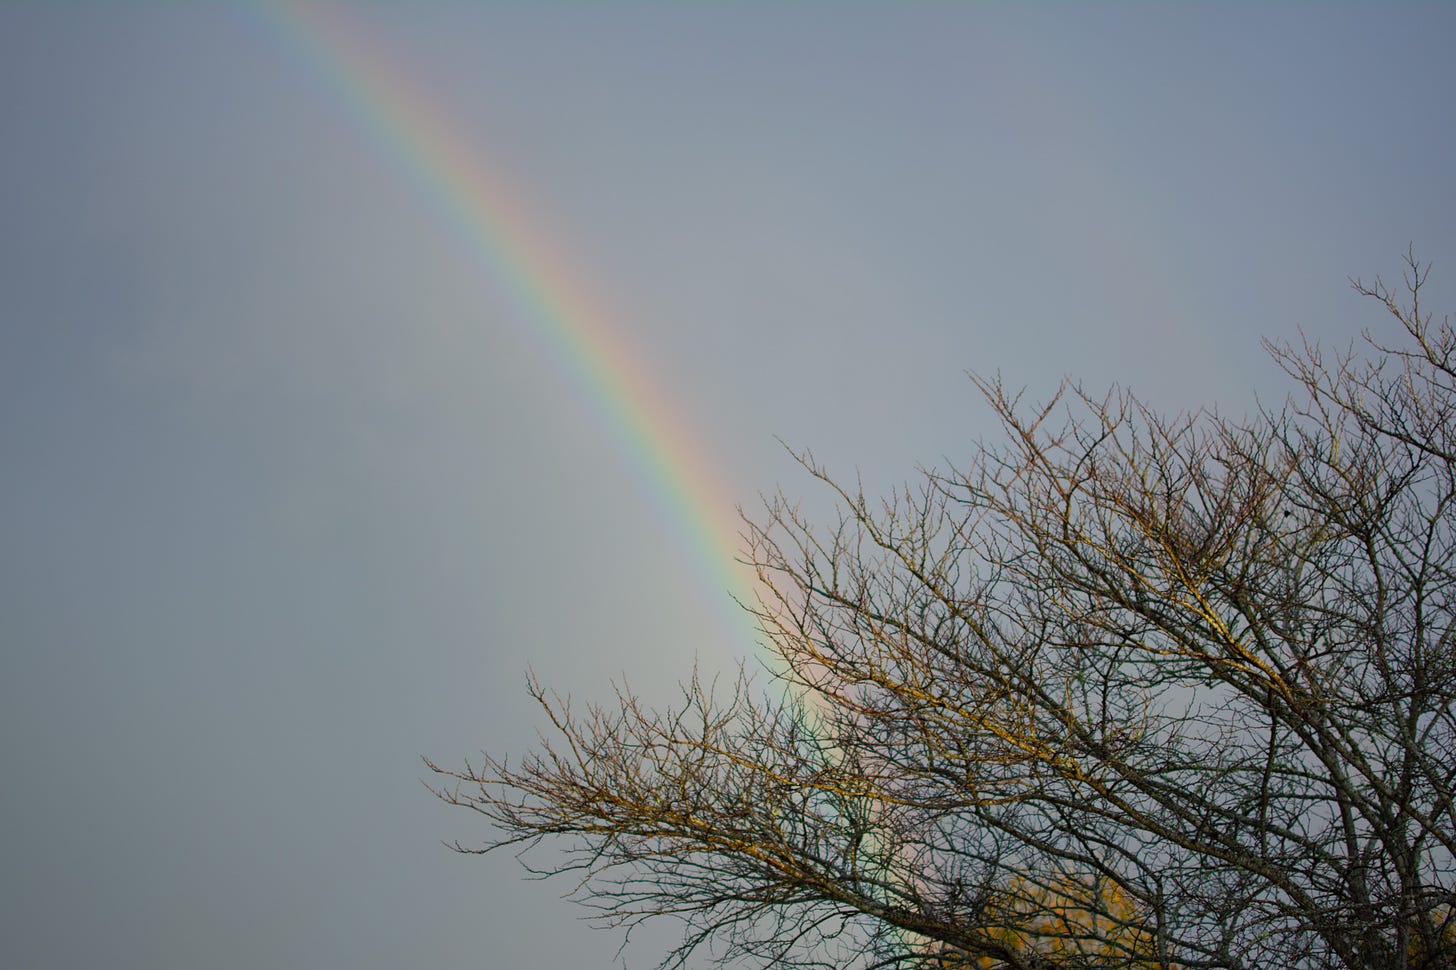 The edge of a rainbow arcing over a blue sky and through the bare branches of a tree